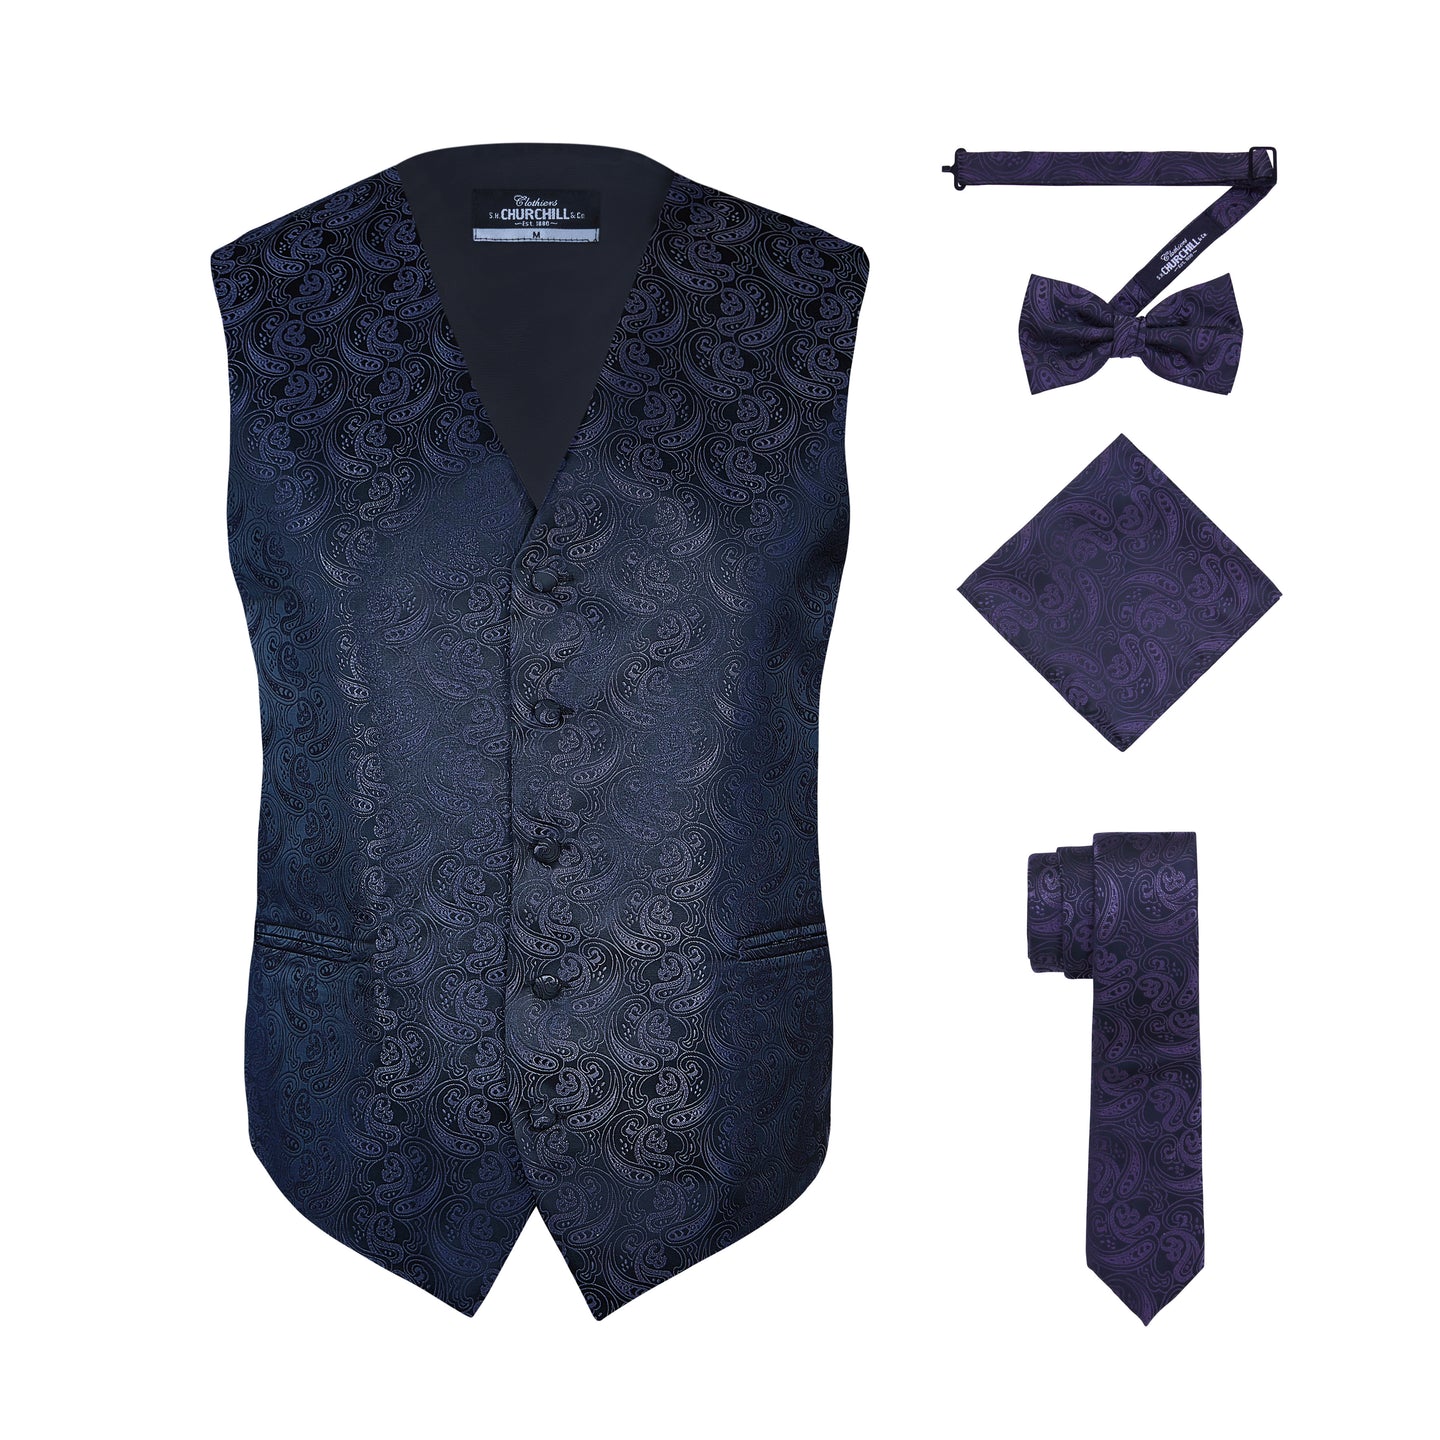 S.H. Churchill & Co. Men's Silver/Black Paisley Vest Set, with Bow Tie, Neck Tie and Pocket Hanky